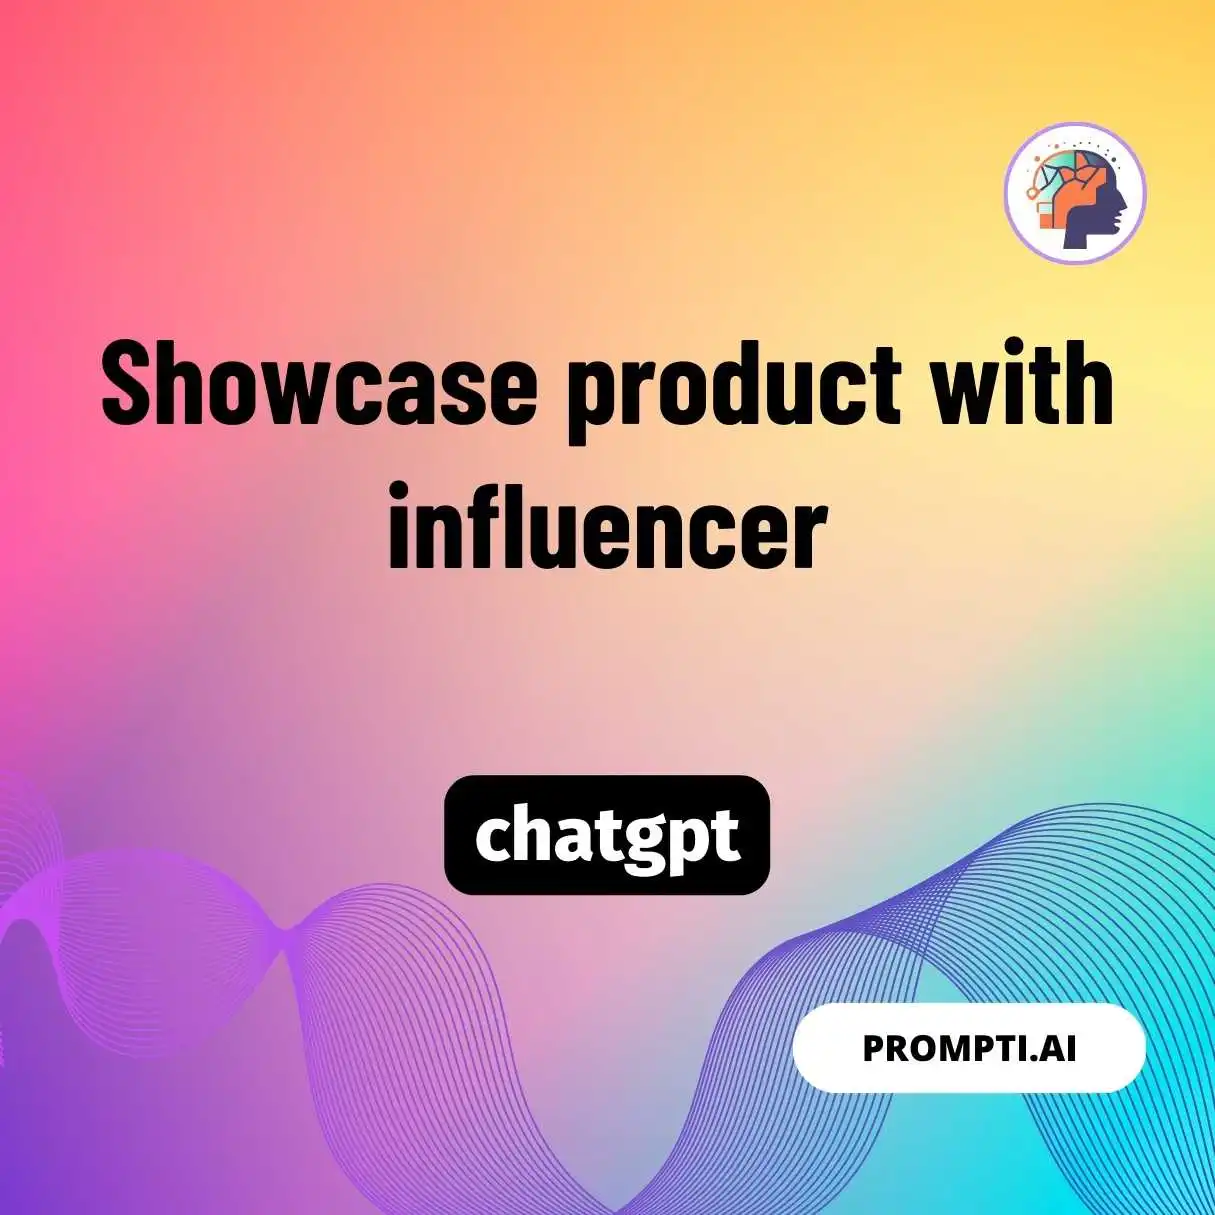 Showcase product with influencer